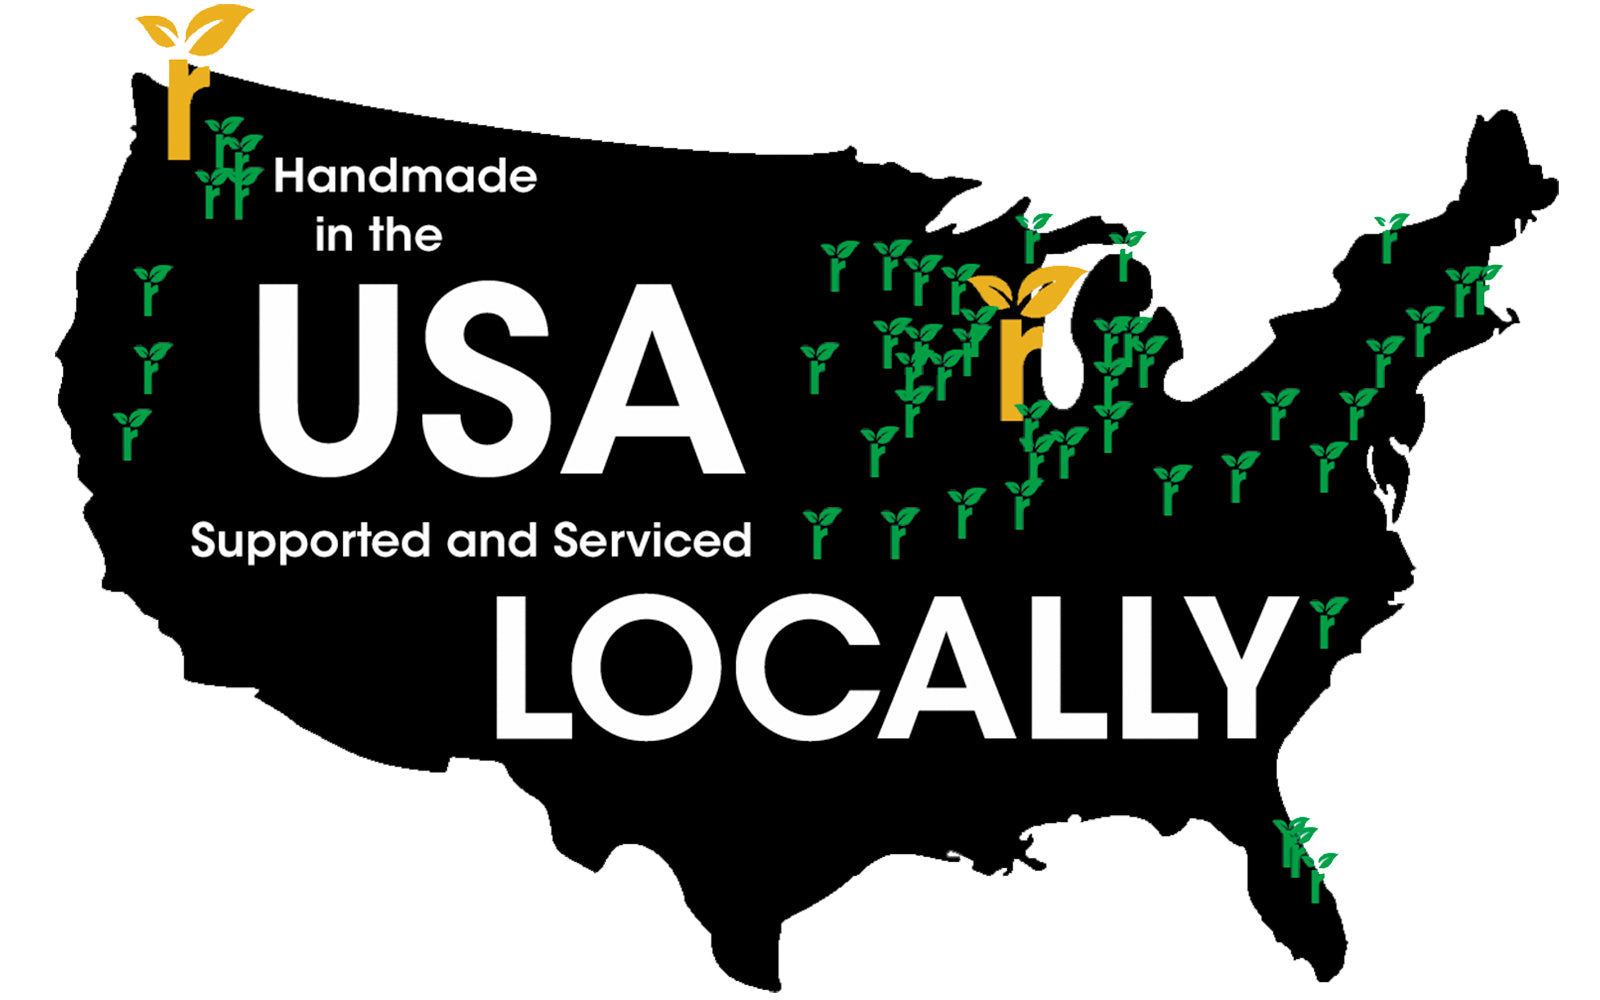 Map of United States reflecting our harvest green experience partners across the country. Our goal is to give our customers the ability to try our mattress in person before they buy. They can do this by visiting one of our local partners.